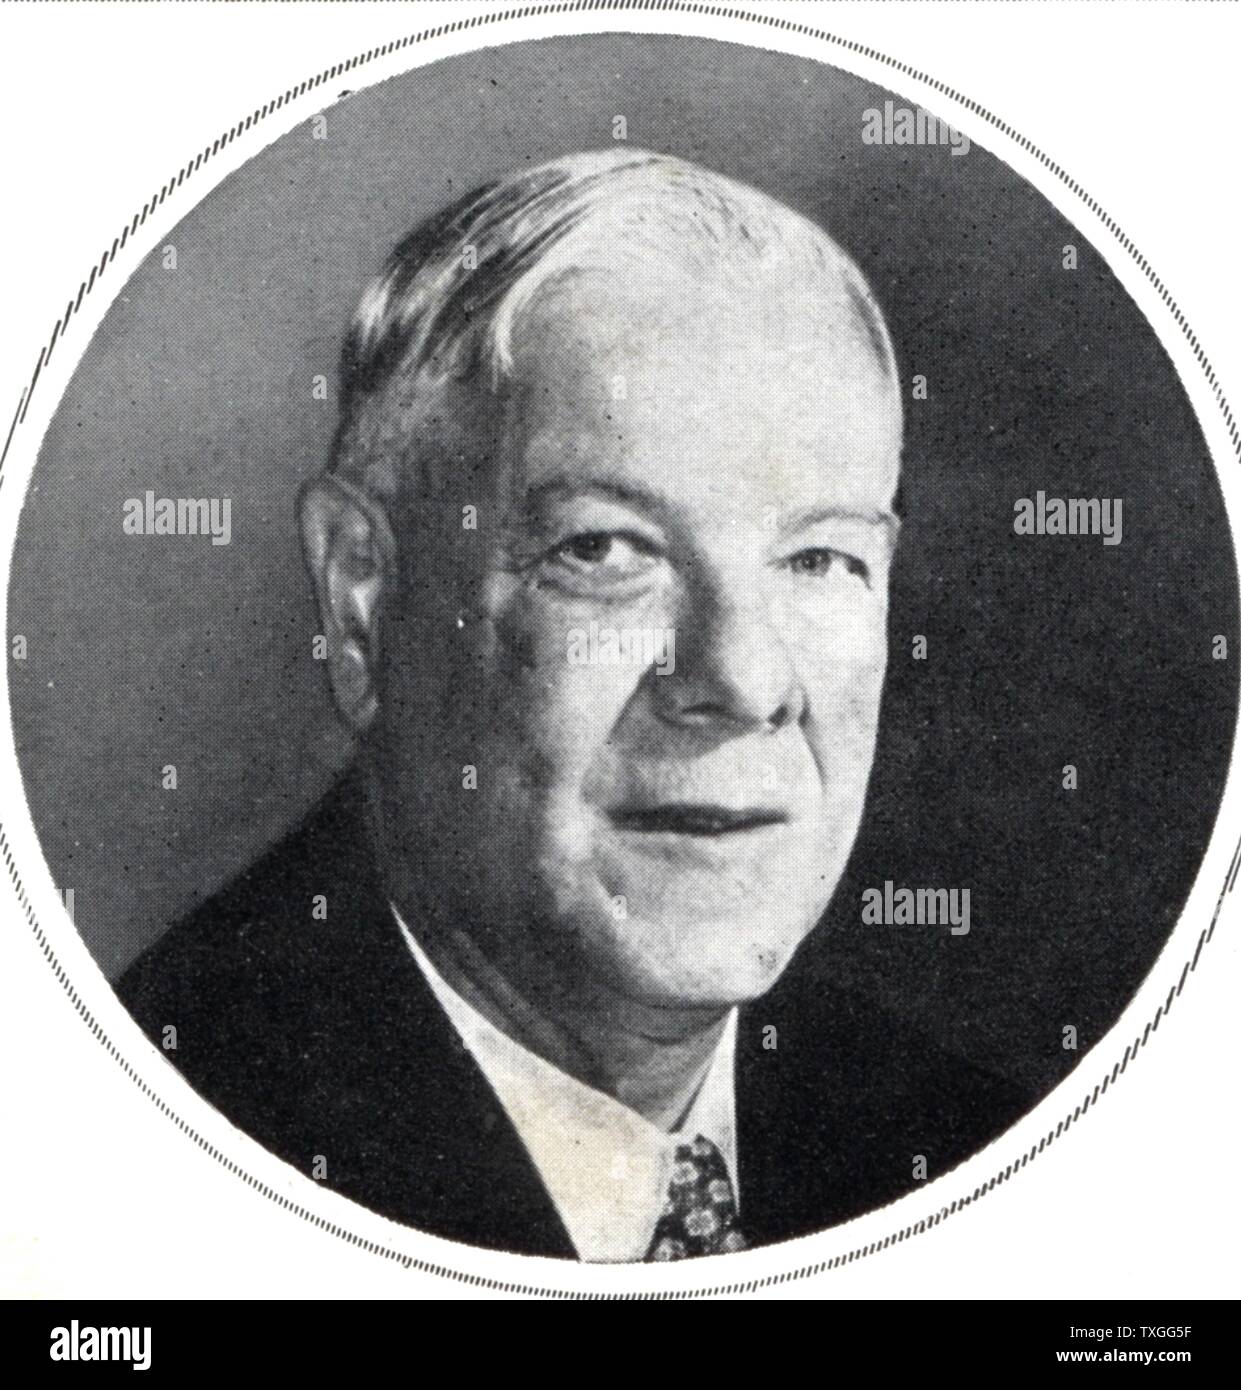 Hendrik Verwoerd (1901-1966), Prime Minister of South Africa. He is often regarded as the mastermind behind implementing the policies of apartheid. Stock Photo